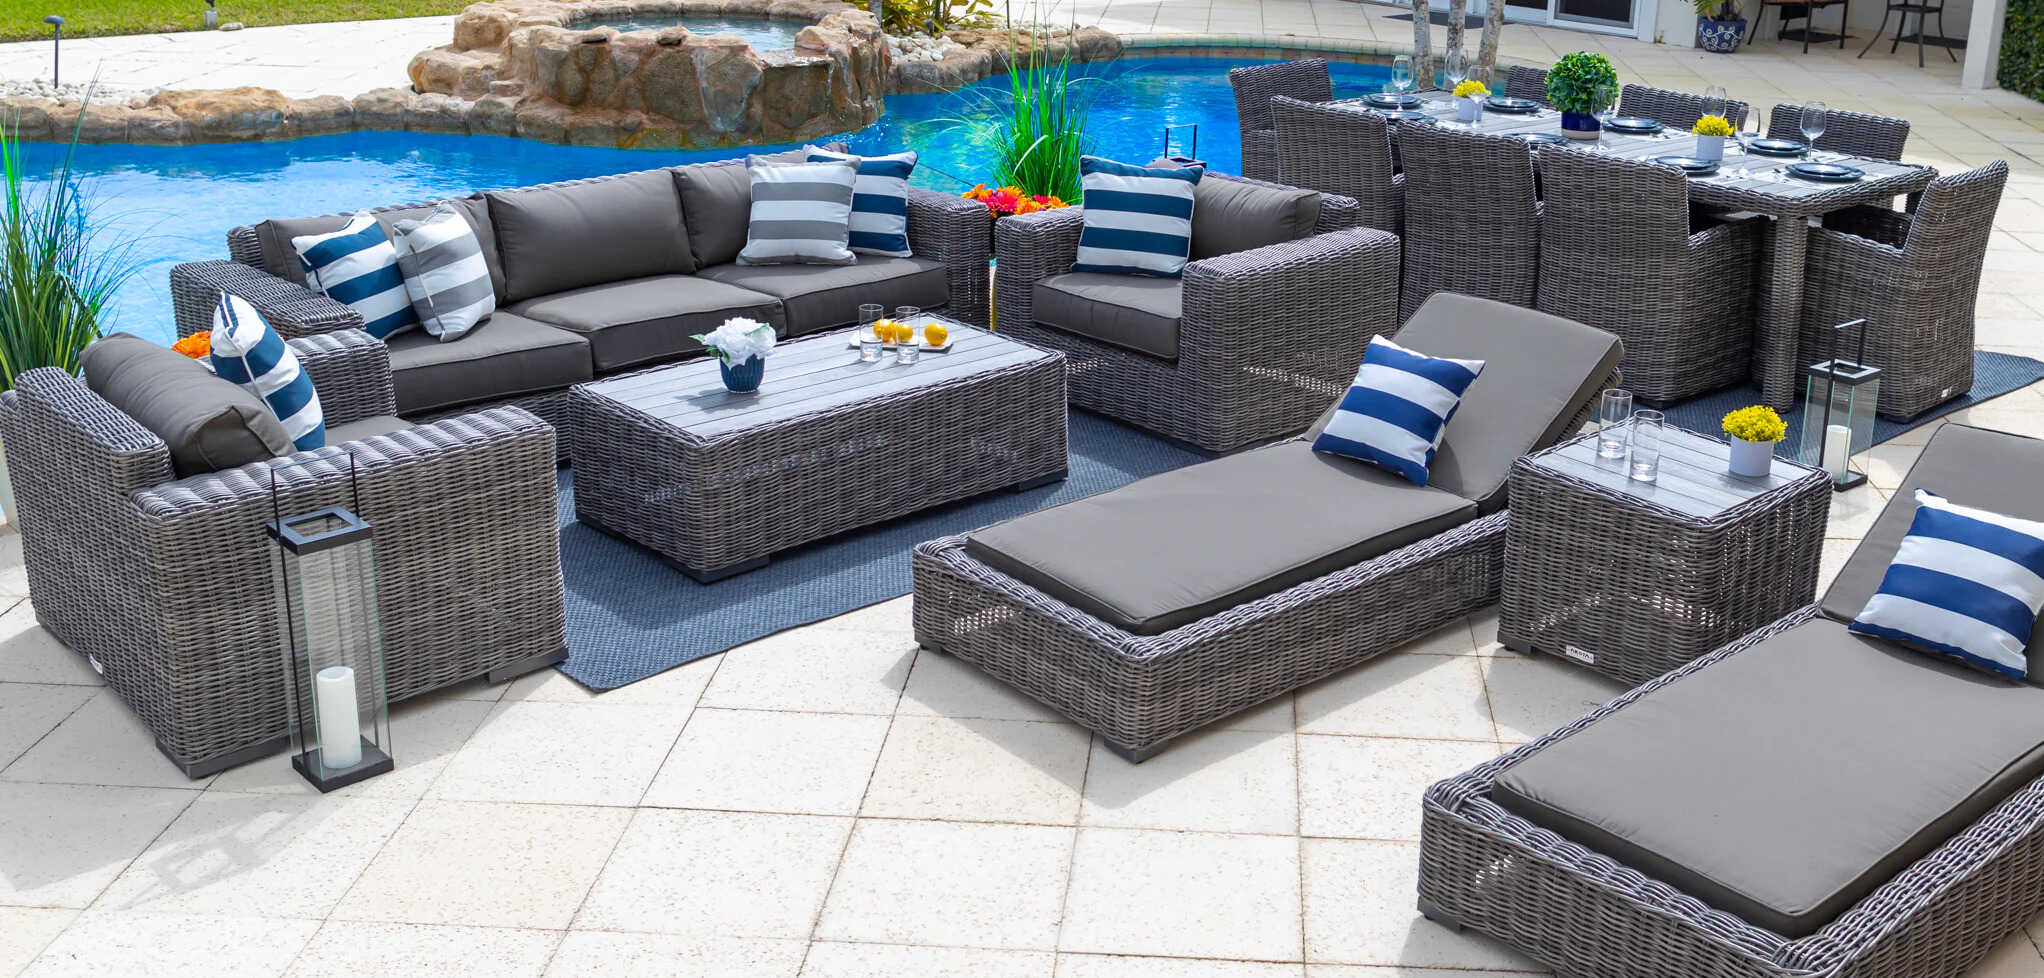 How To Set Up Patio Furniture